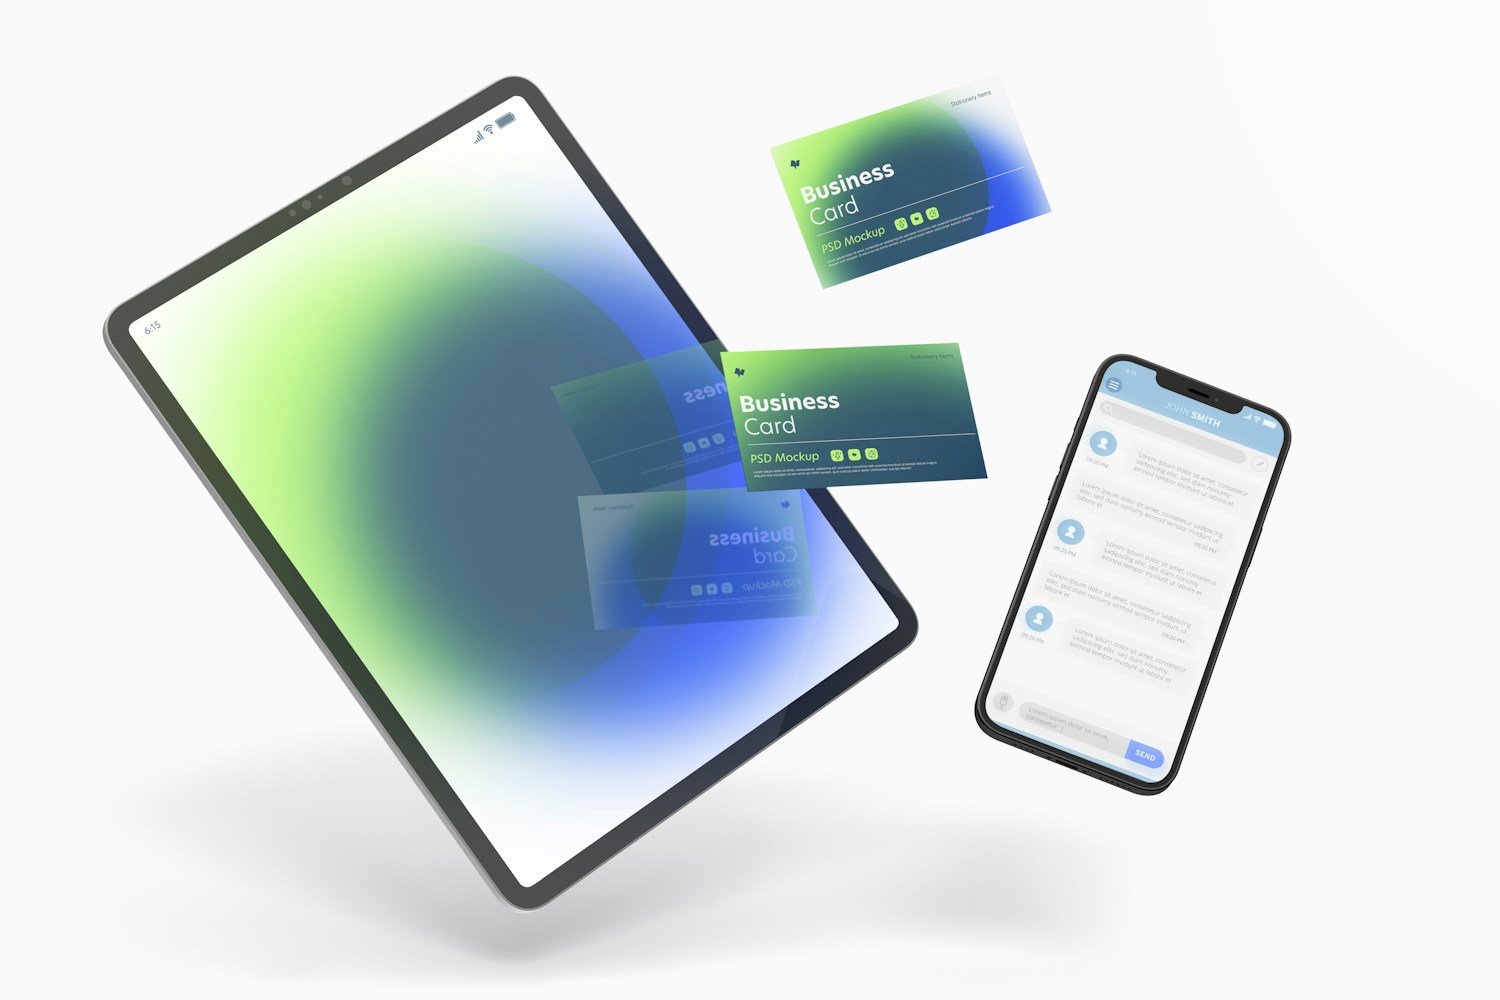 Business Card with Devices Mockup 02, Floating